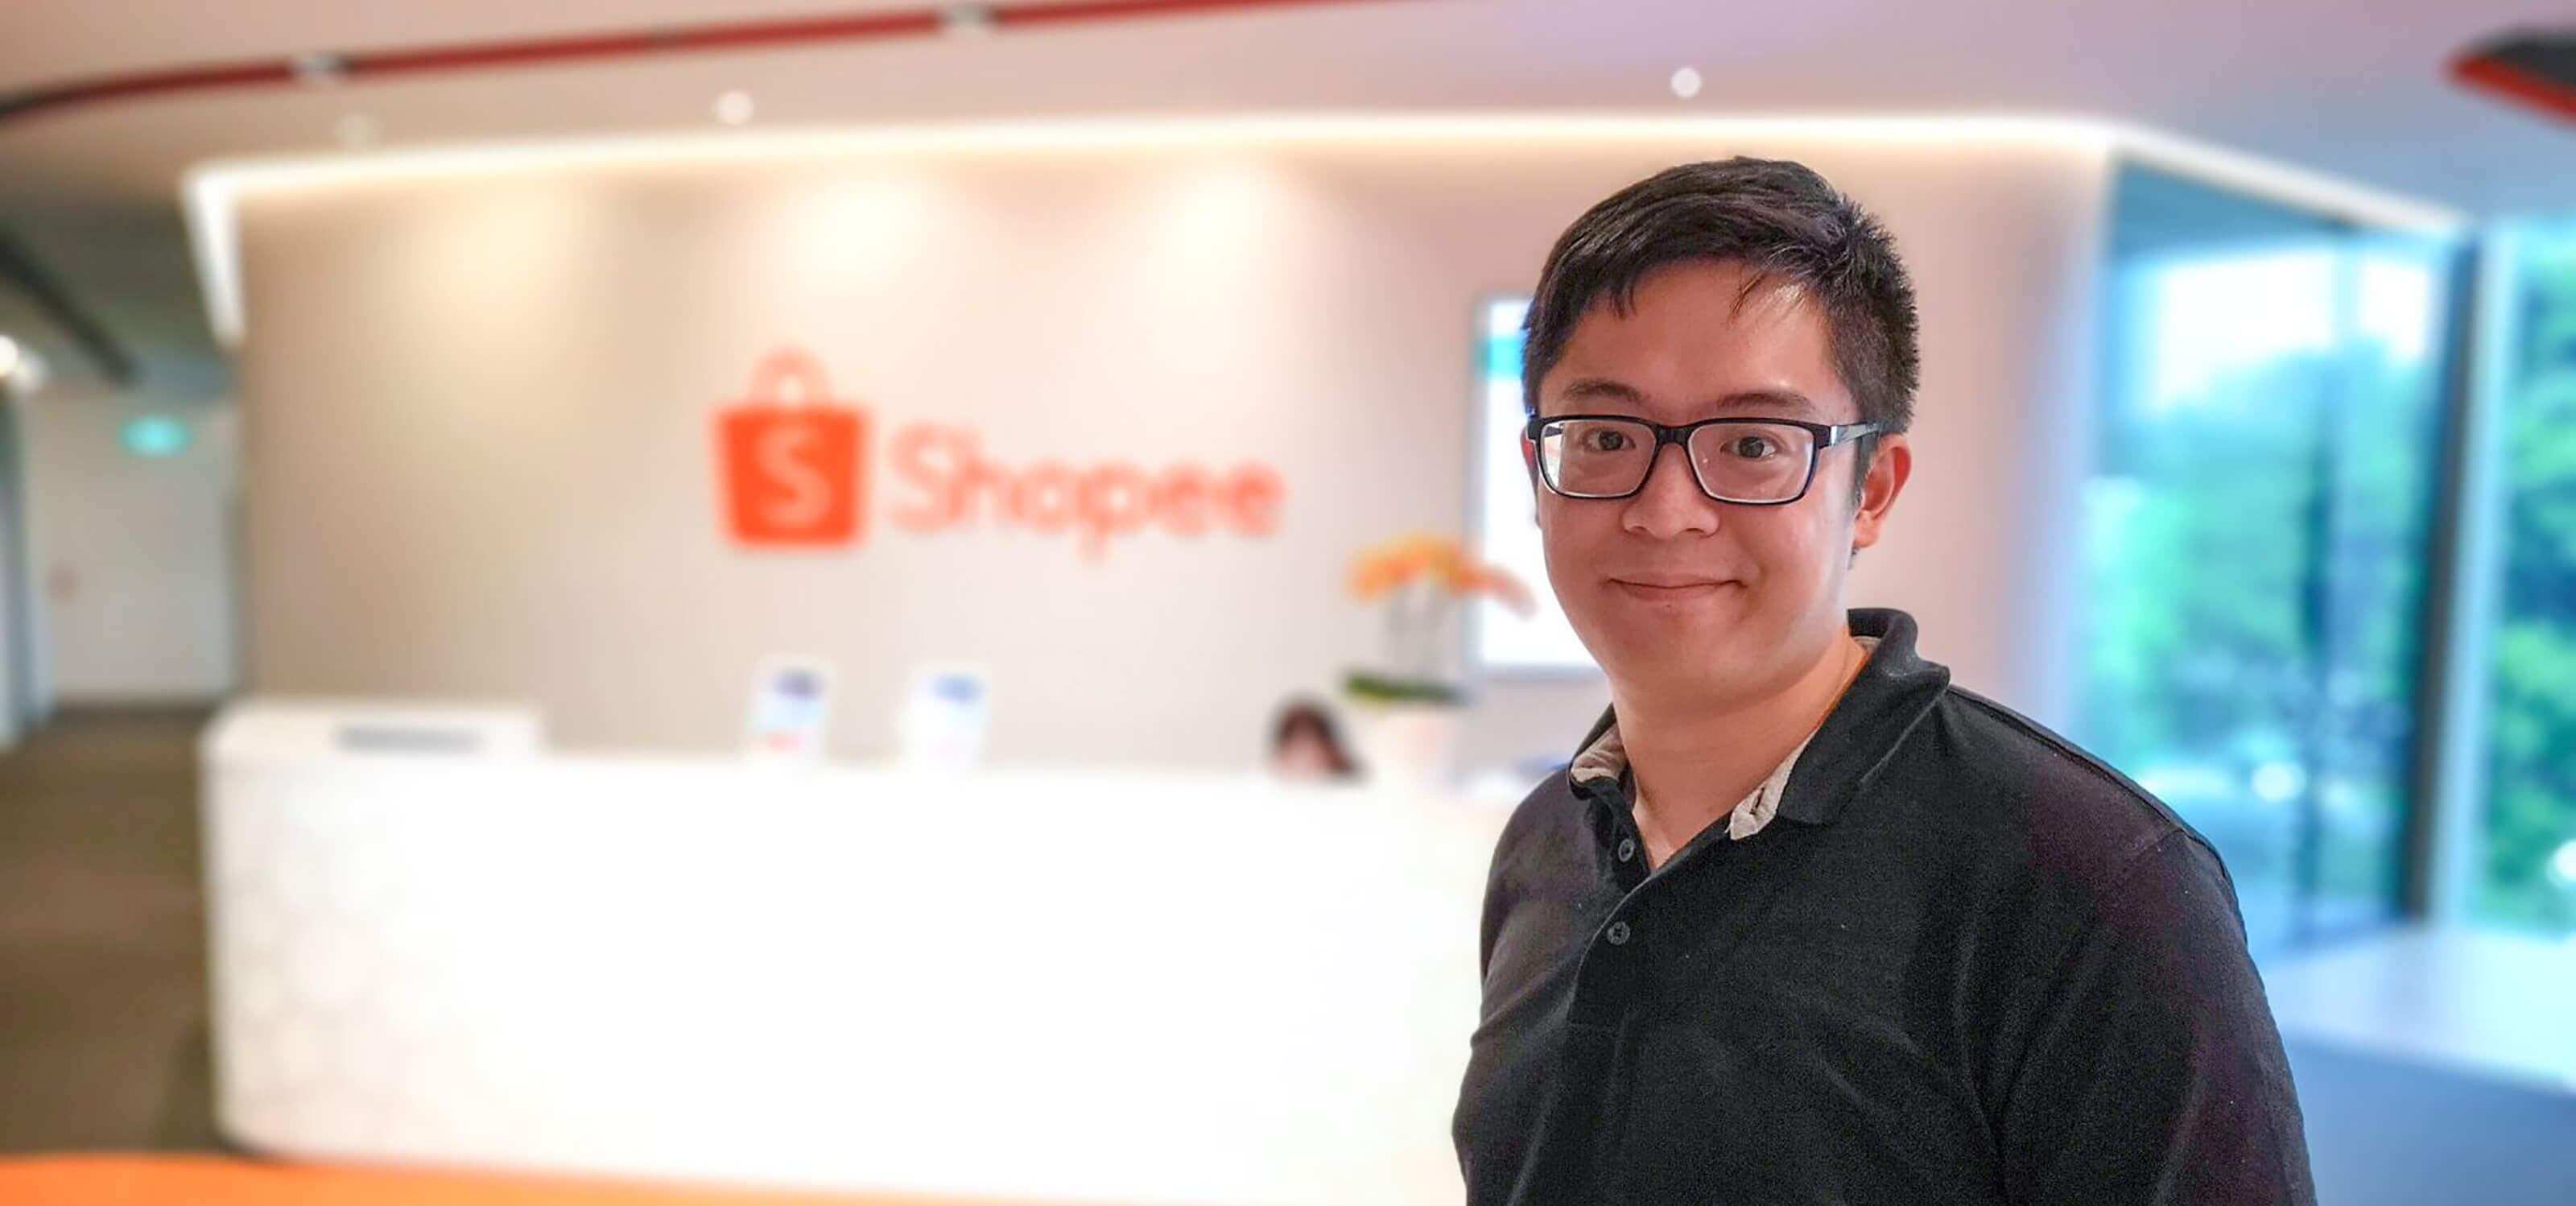 DigiPen (Singapore) alumnus Chester Liew stands in front of a wall adorned with the Shopee logo